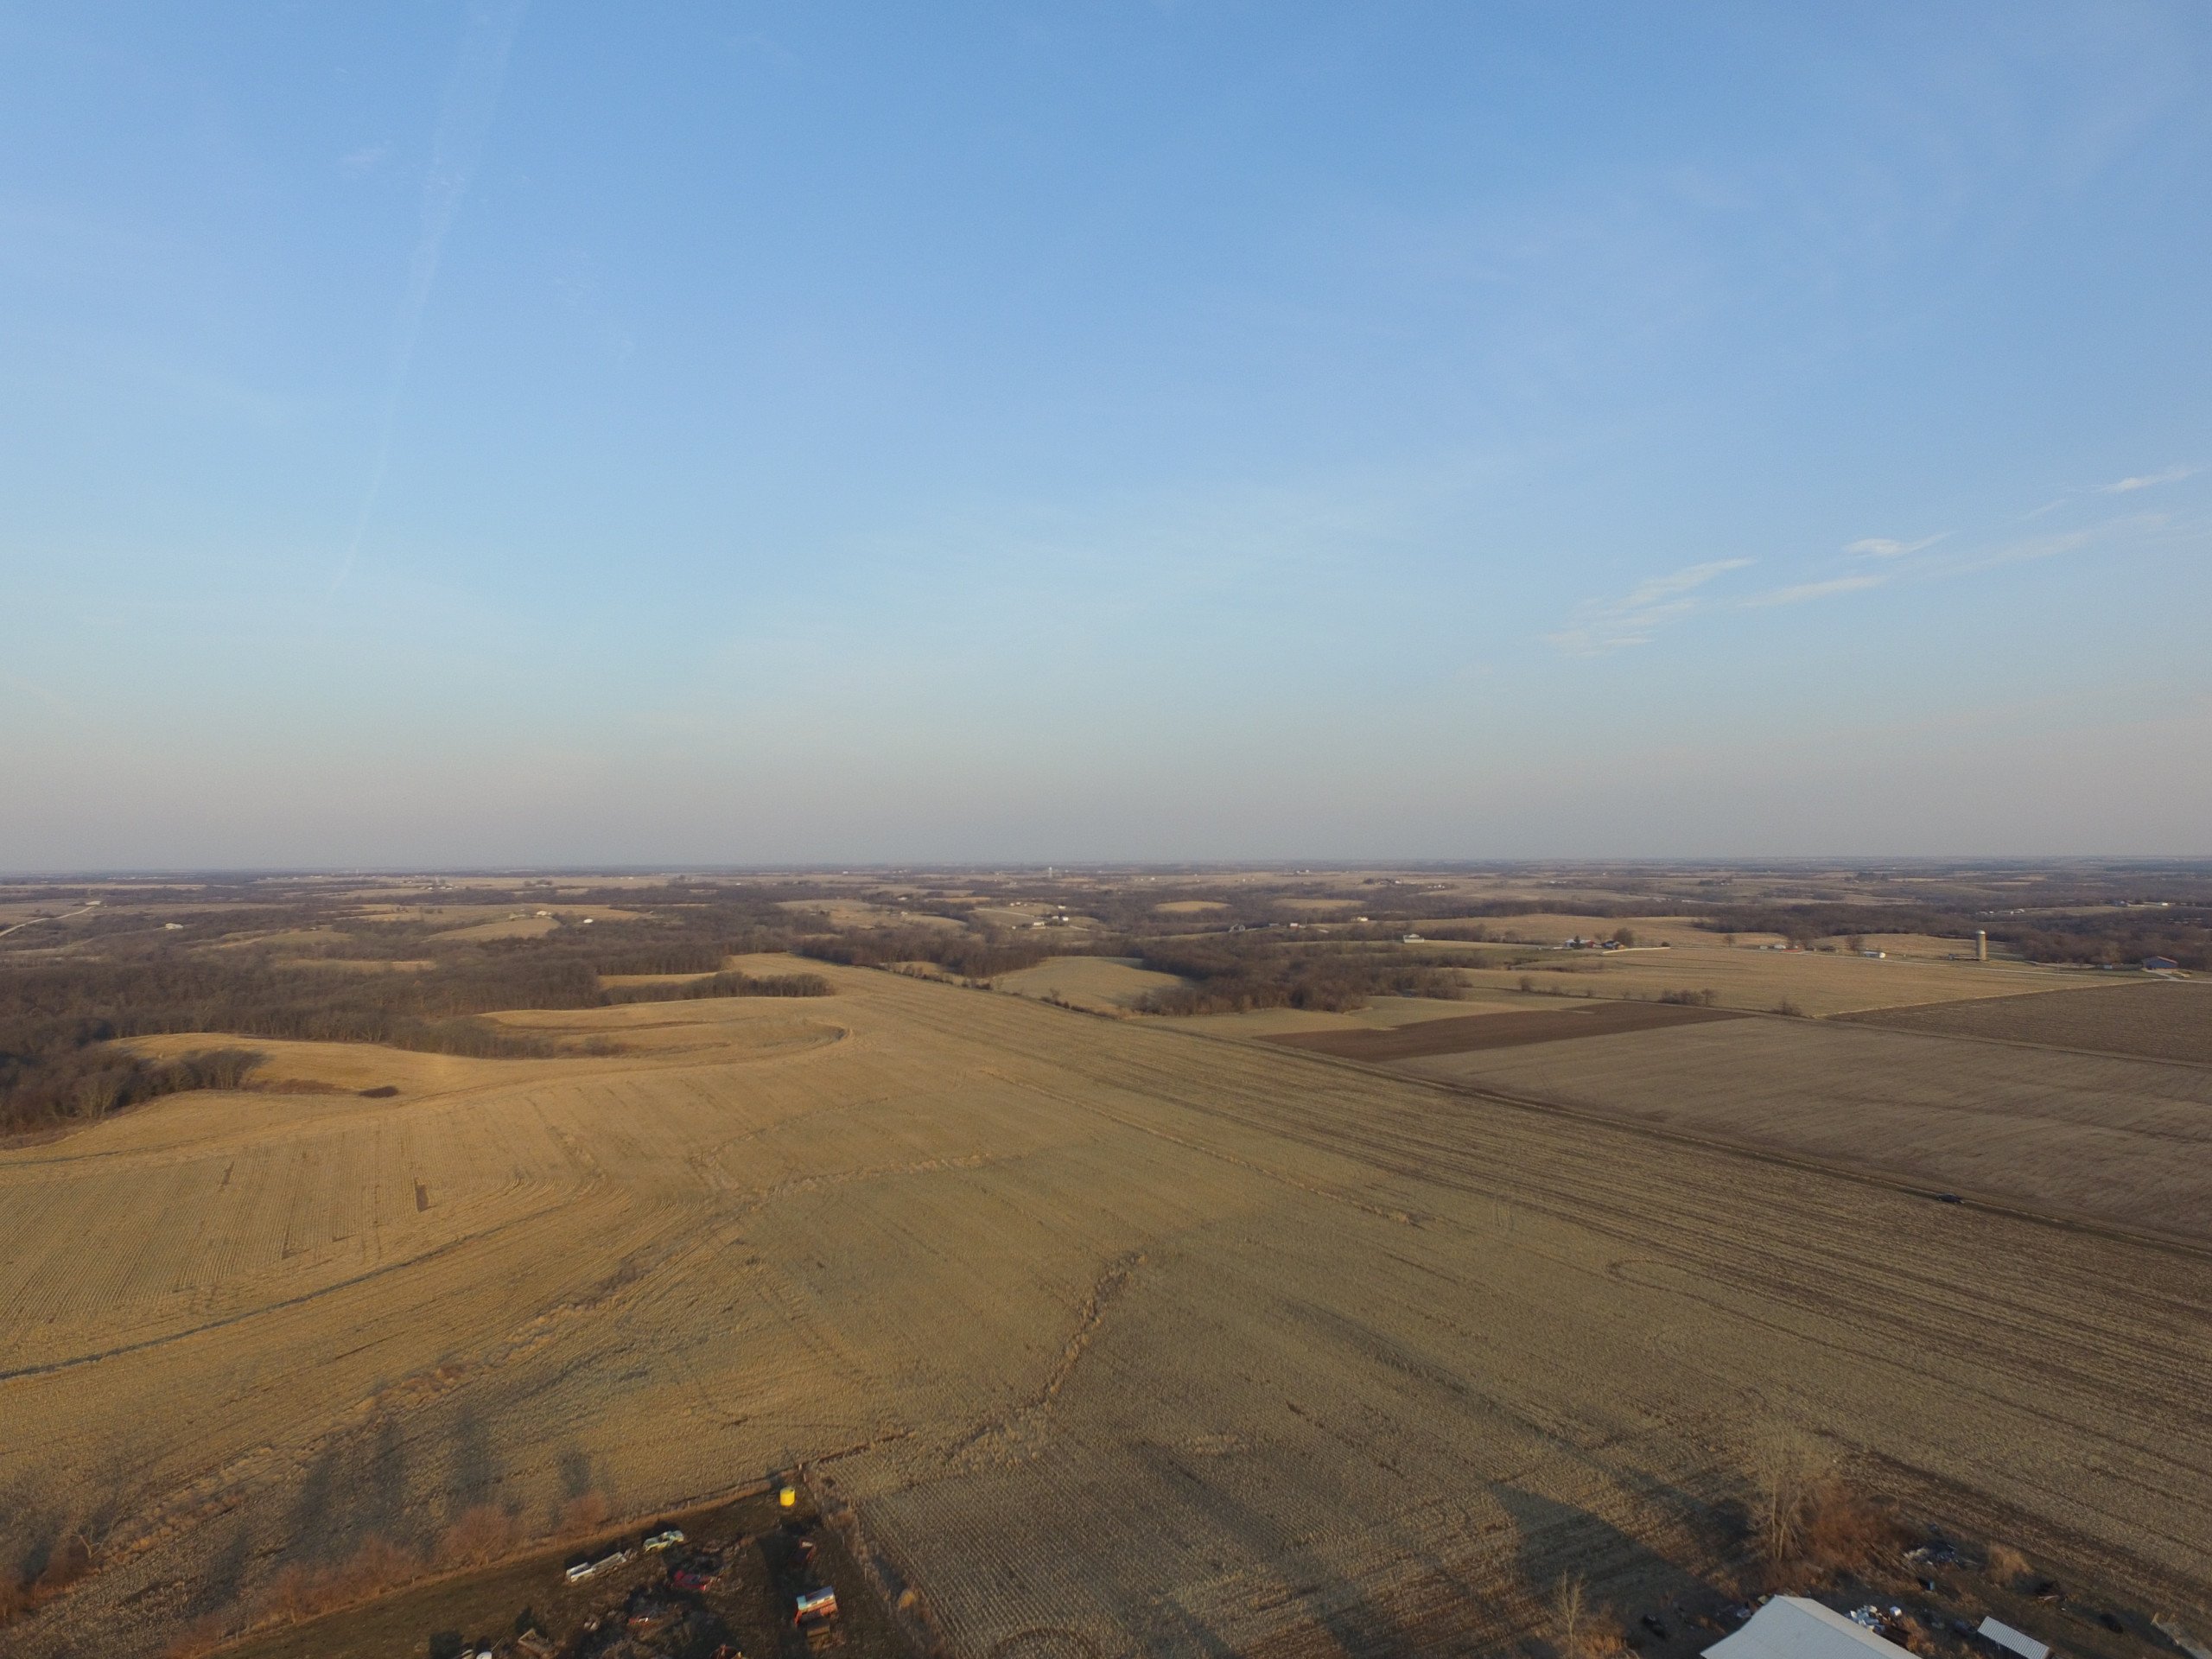 land-marion-county-iowa-86-acres-listing-number-16742-DJI_0008 - Copy-3.jpg